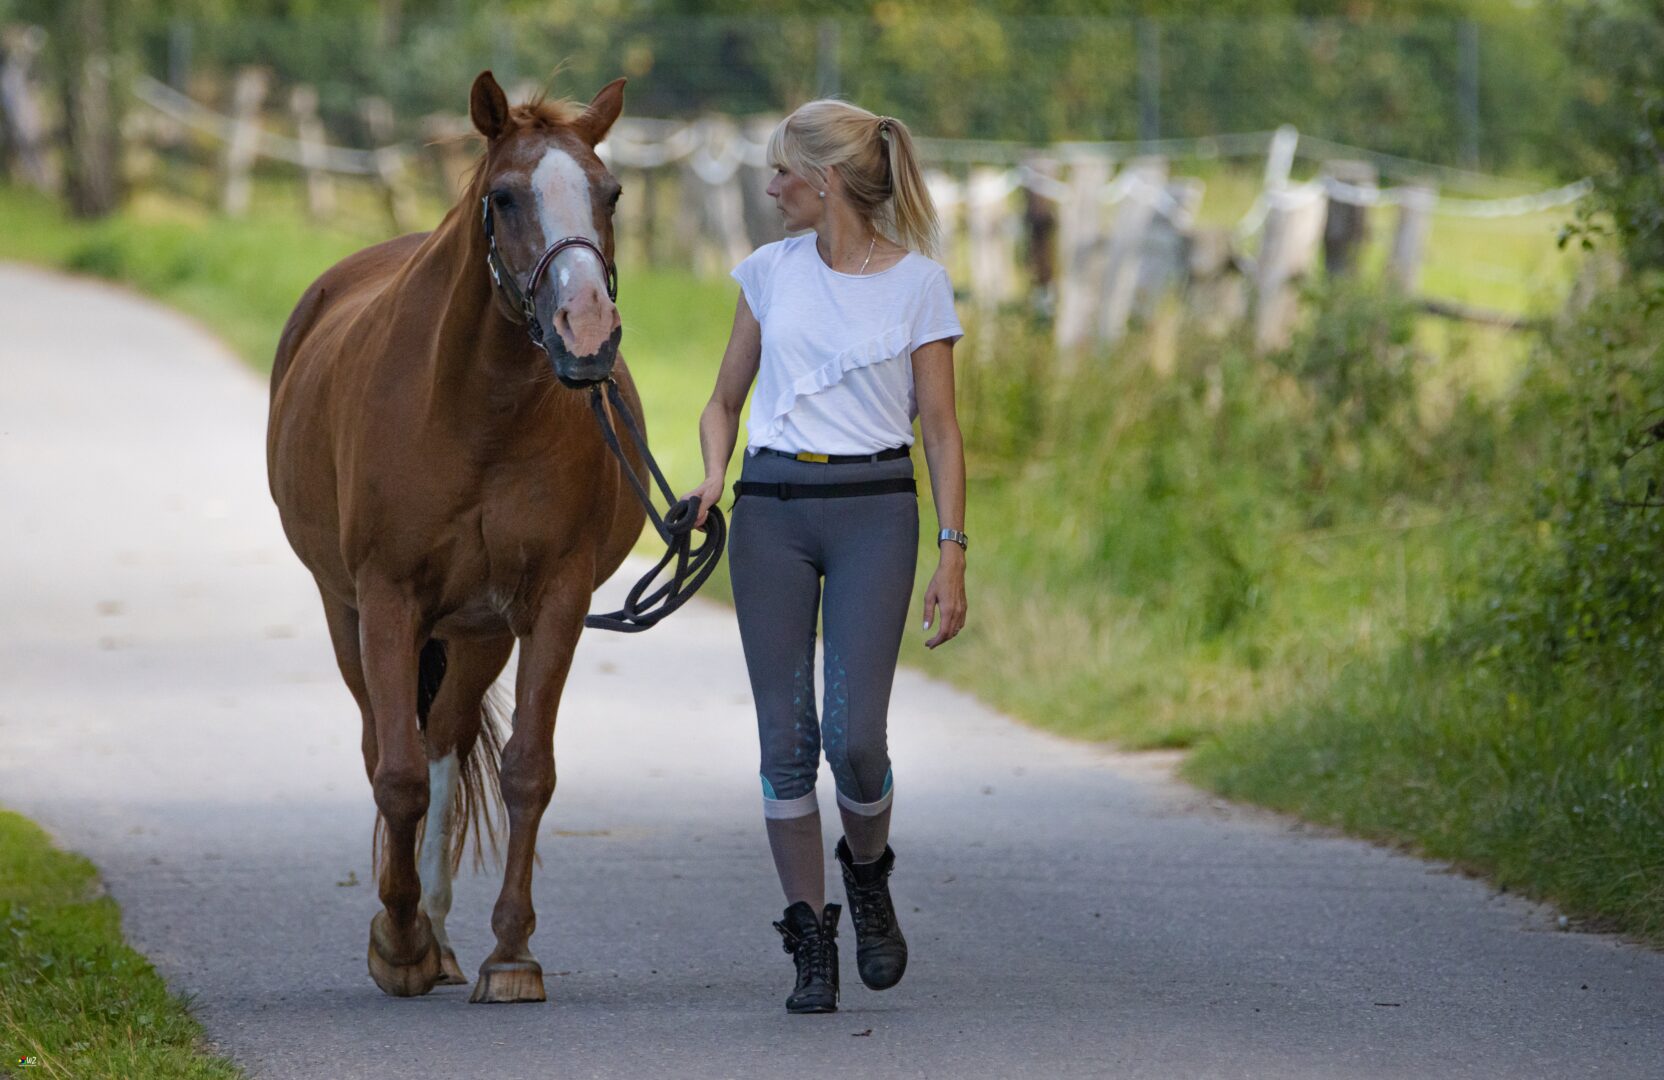 girl with white top walking with horse